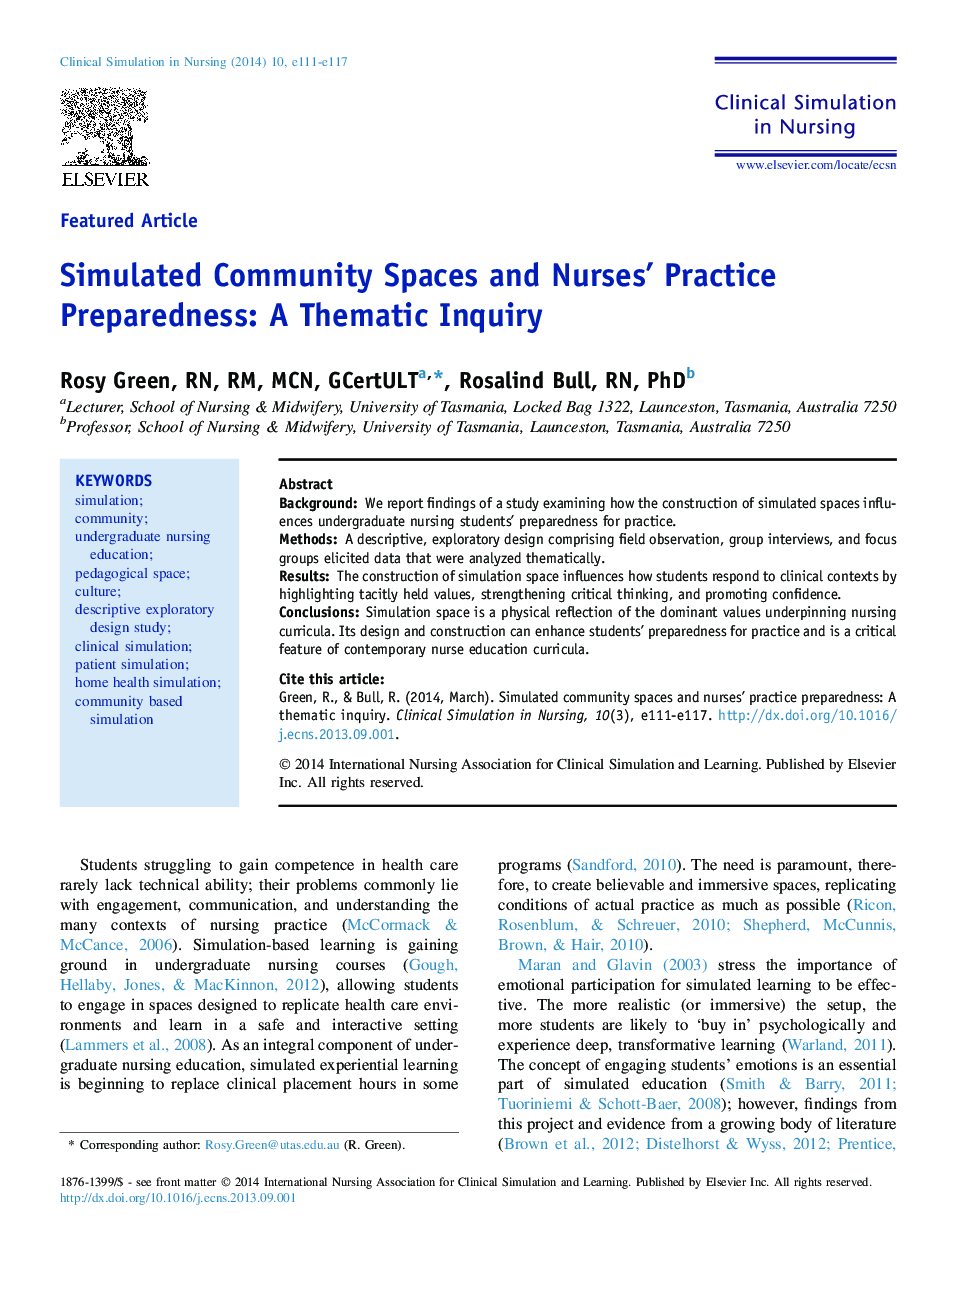 Simulated Community Spaces and Nurses' Practice Preparedness: A Thematic Inquiry